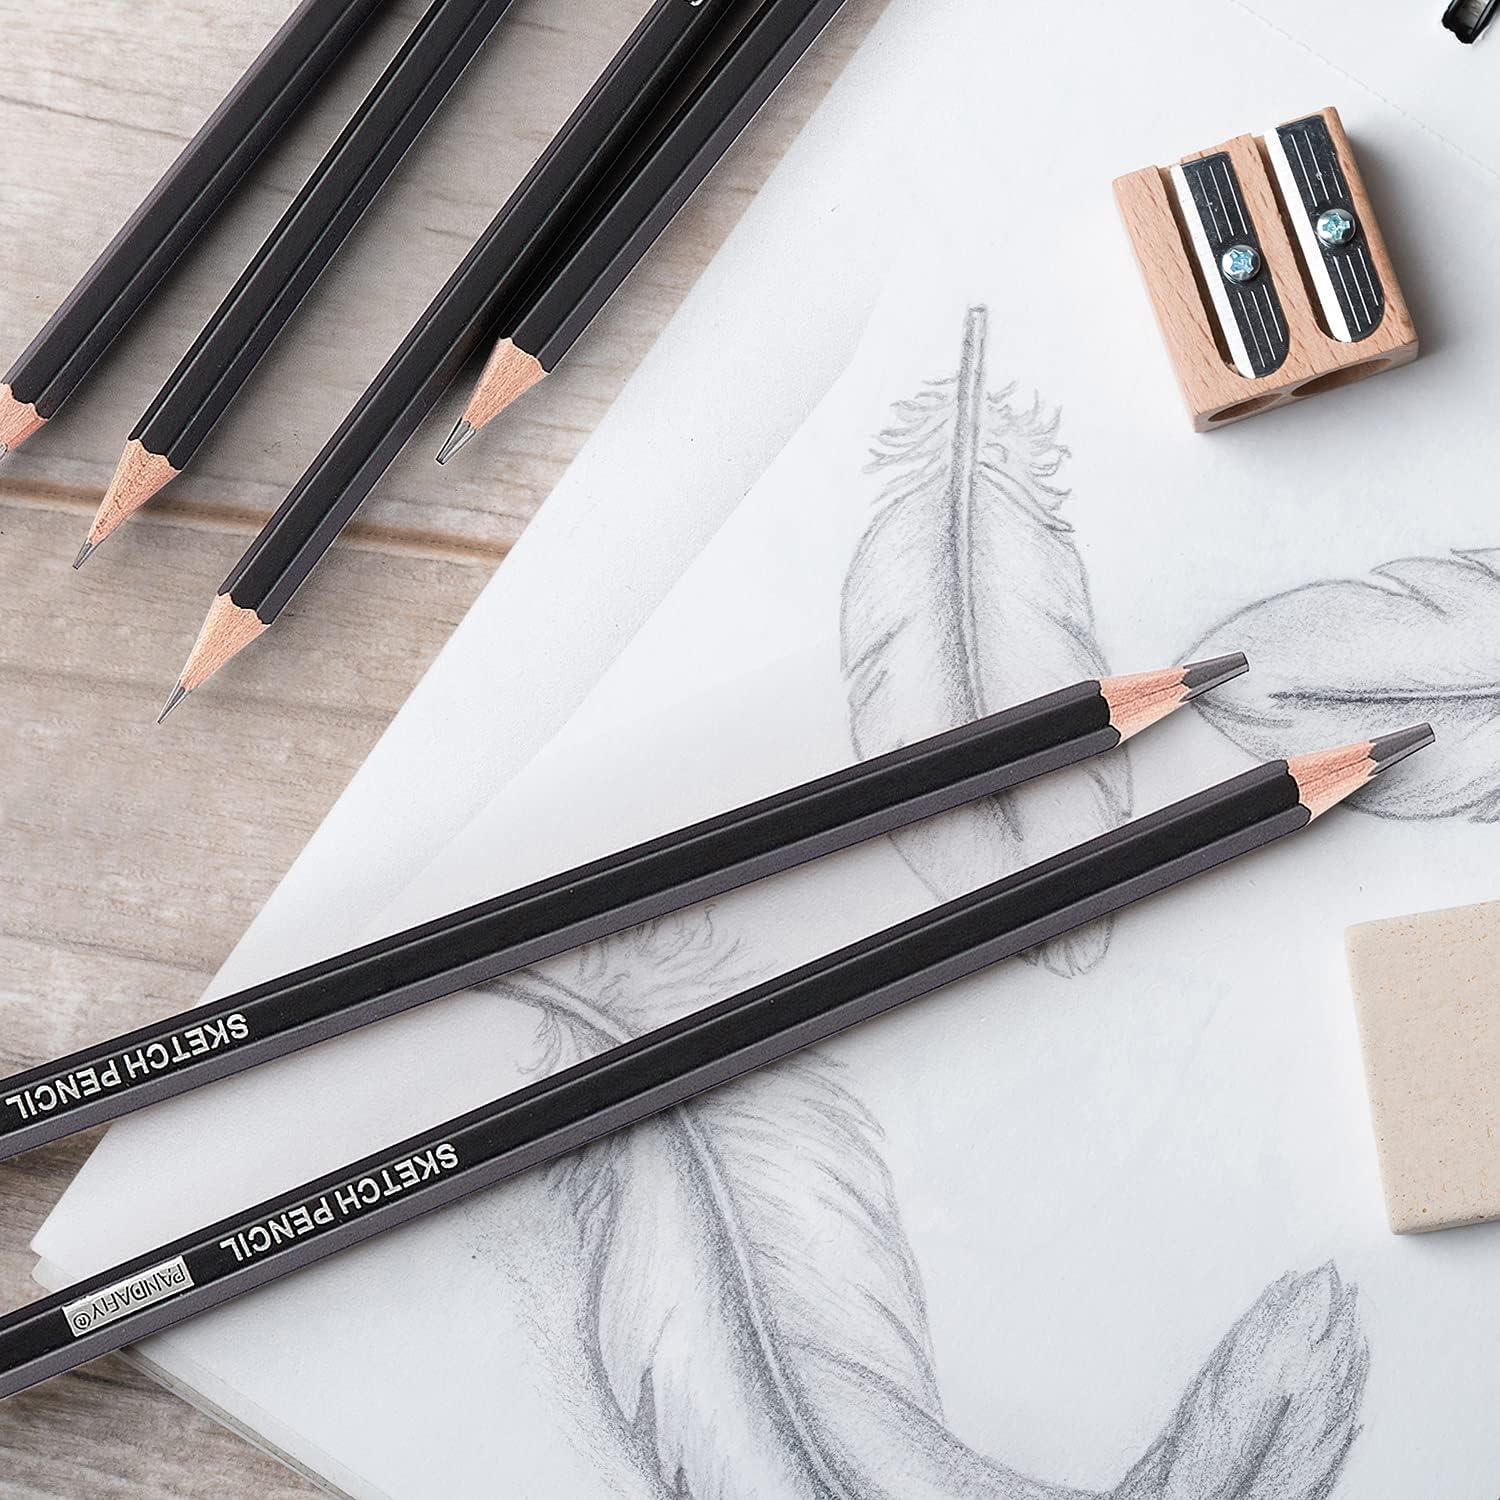 PANDAFLY Professional Drawing Sketching Pencil Set - 12 Pieces Graphite  Pencils(14B - 2H), Ideal for Drawing Art, Sketching, Shading, Artist  Pencils for Beginners & Pro Artists 12 Pack - Black